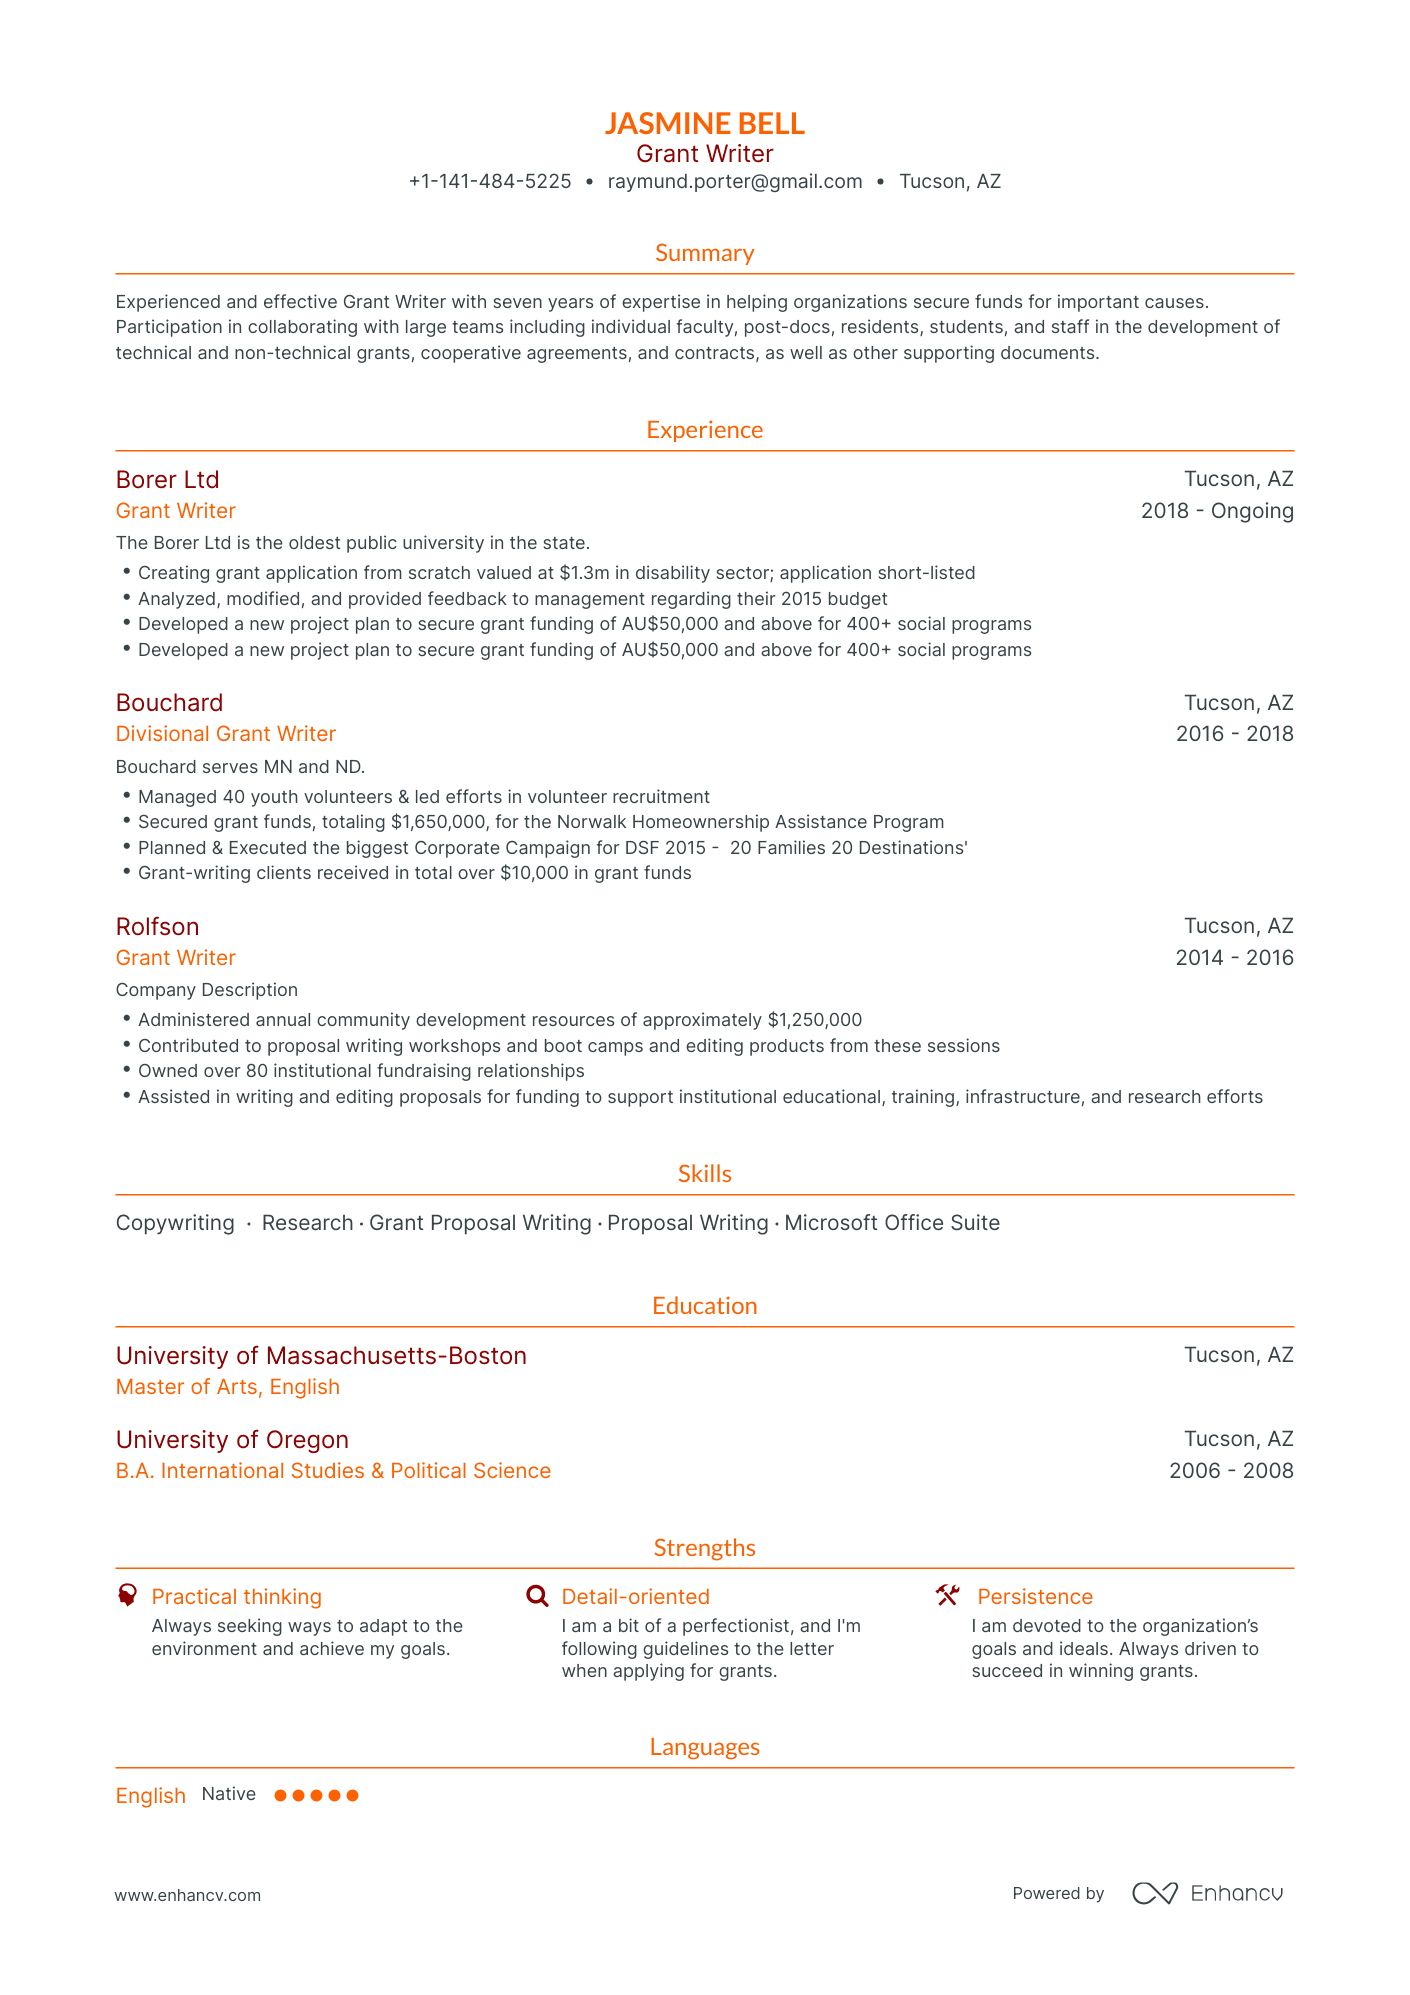 Traditional Grant Writer Resume Template